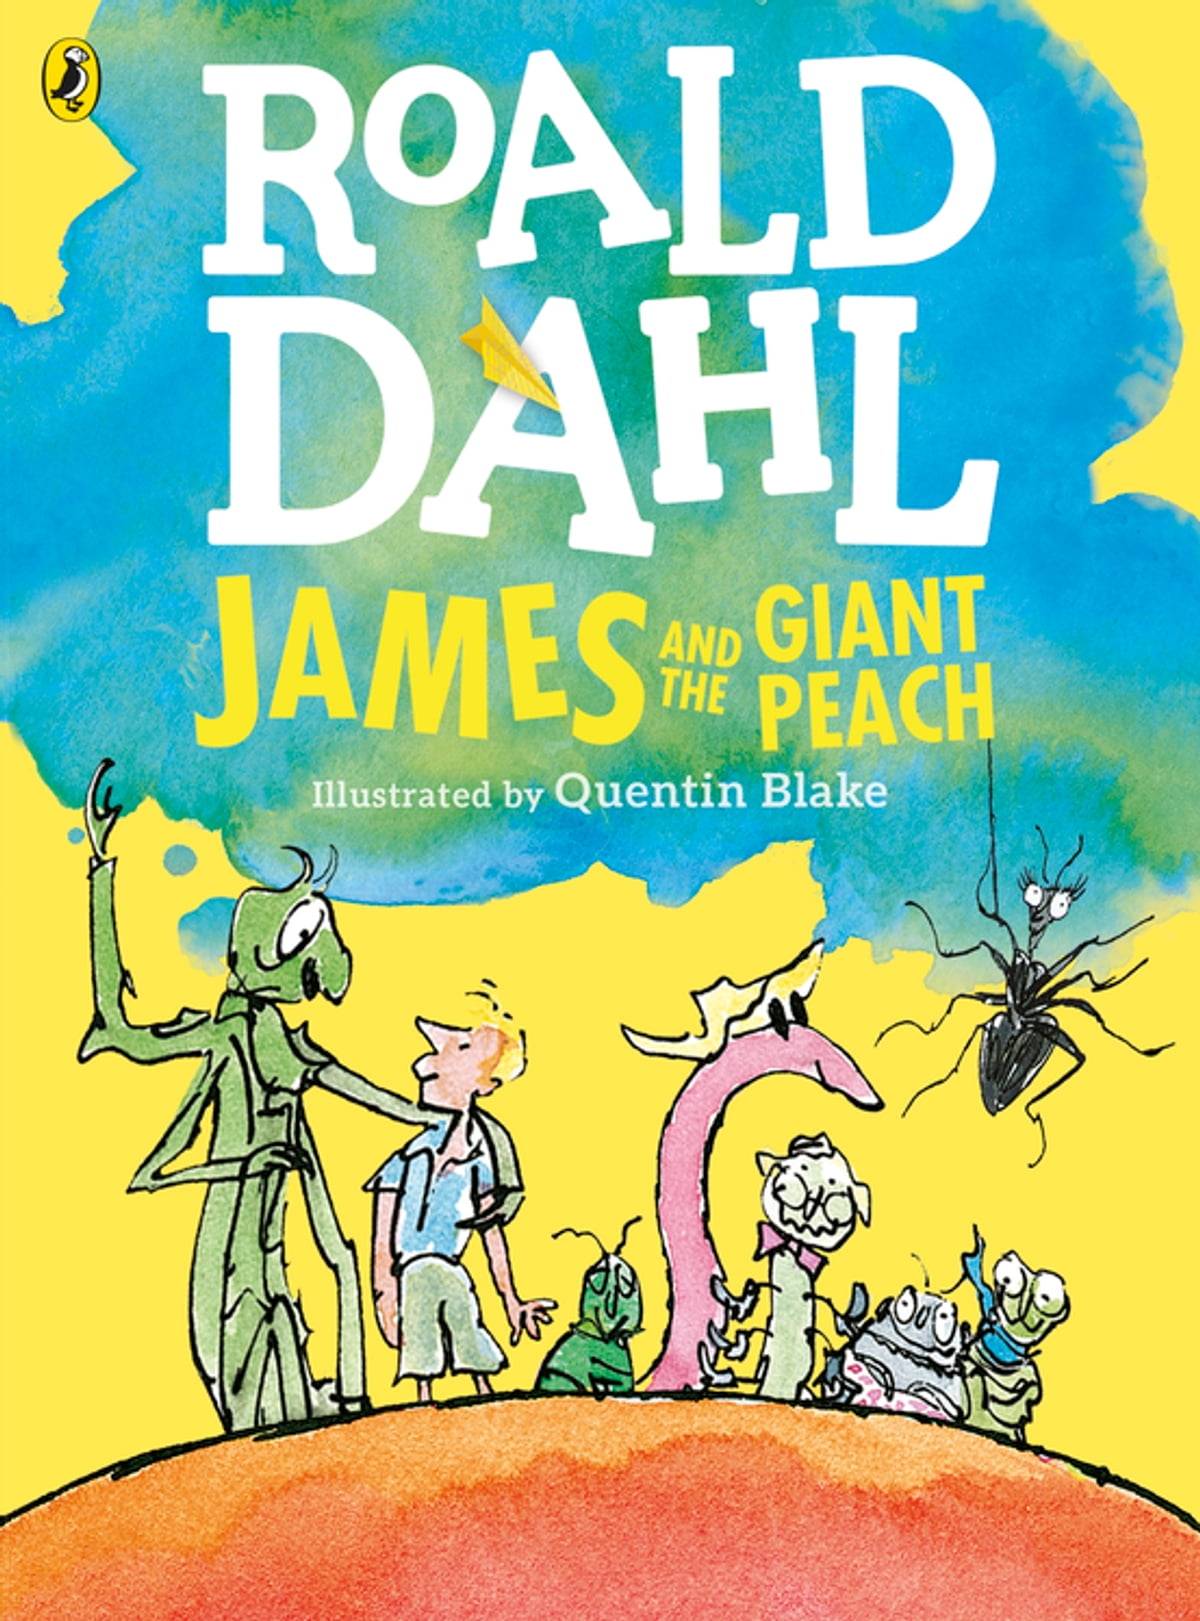 IMG : James and the Giant Peach